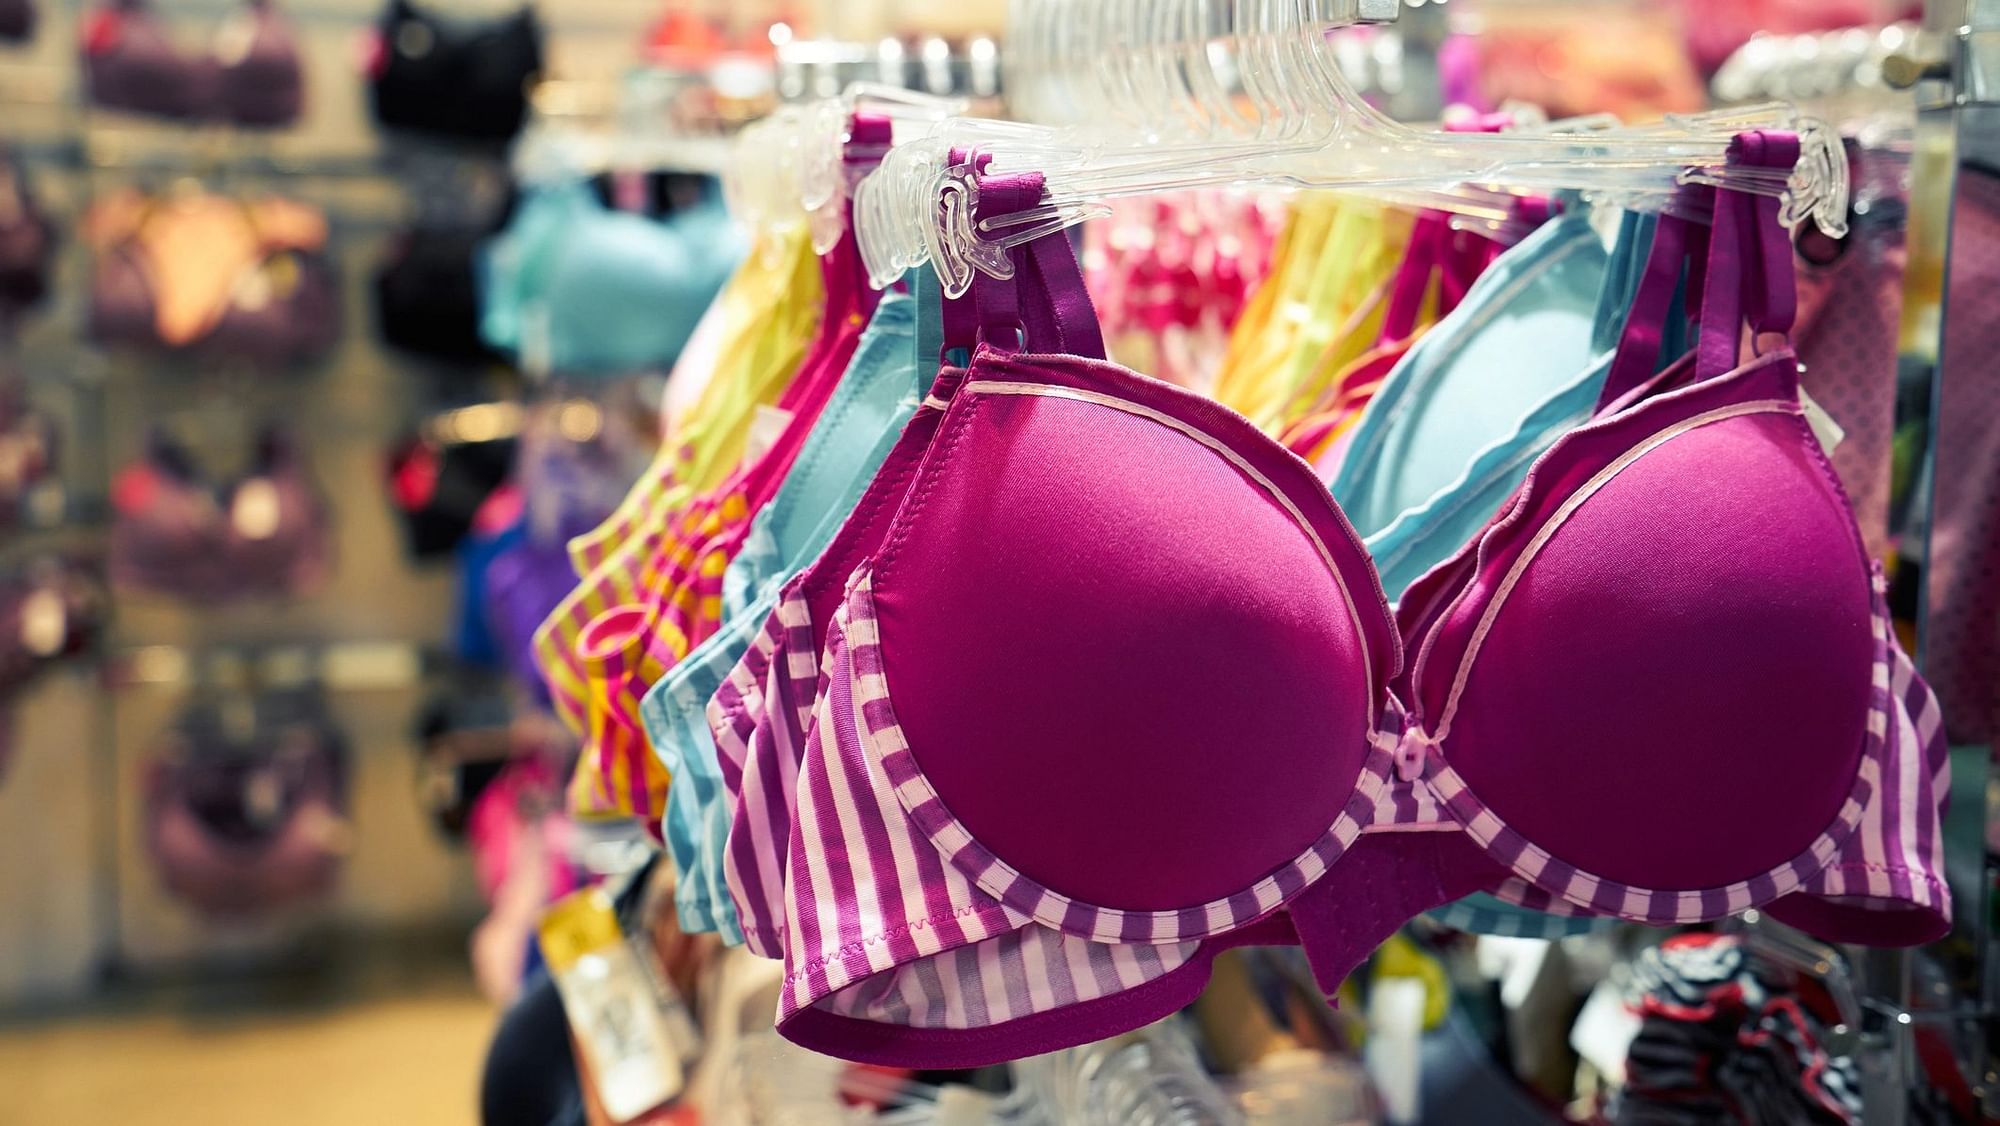 Wearing the wrong size bra isn't just uncomfy - it's RUINING your health